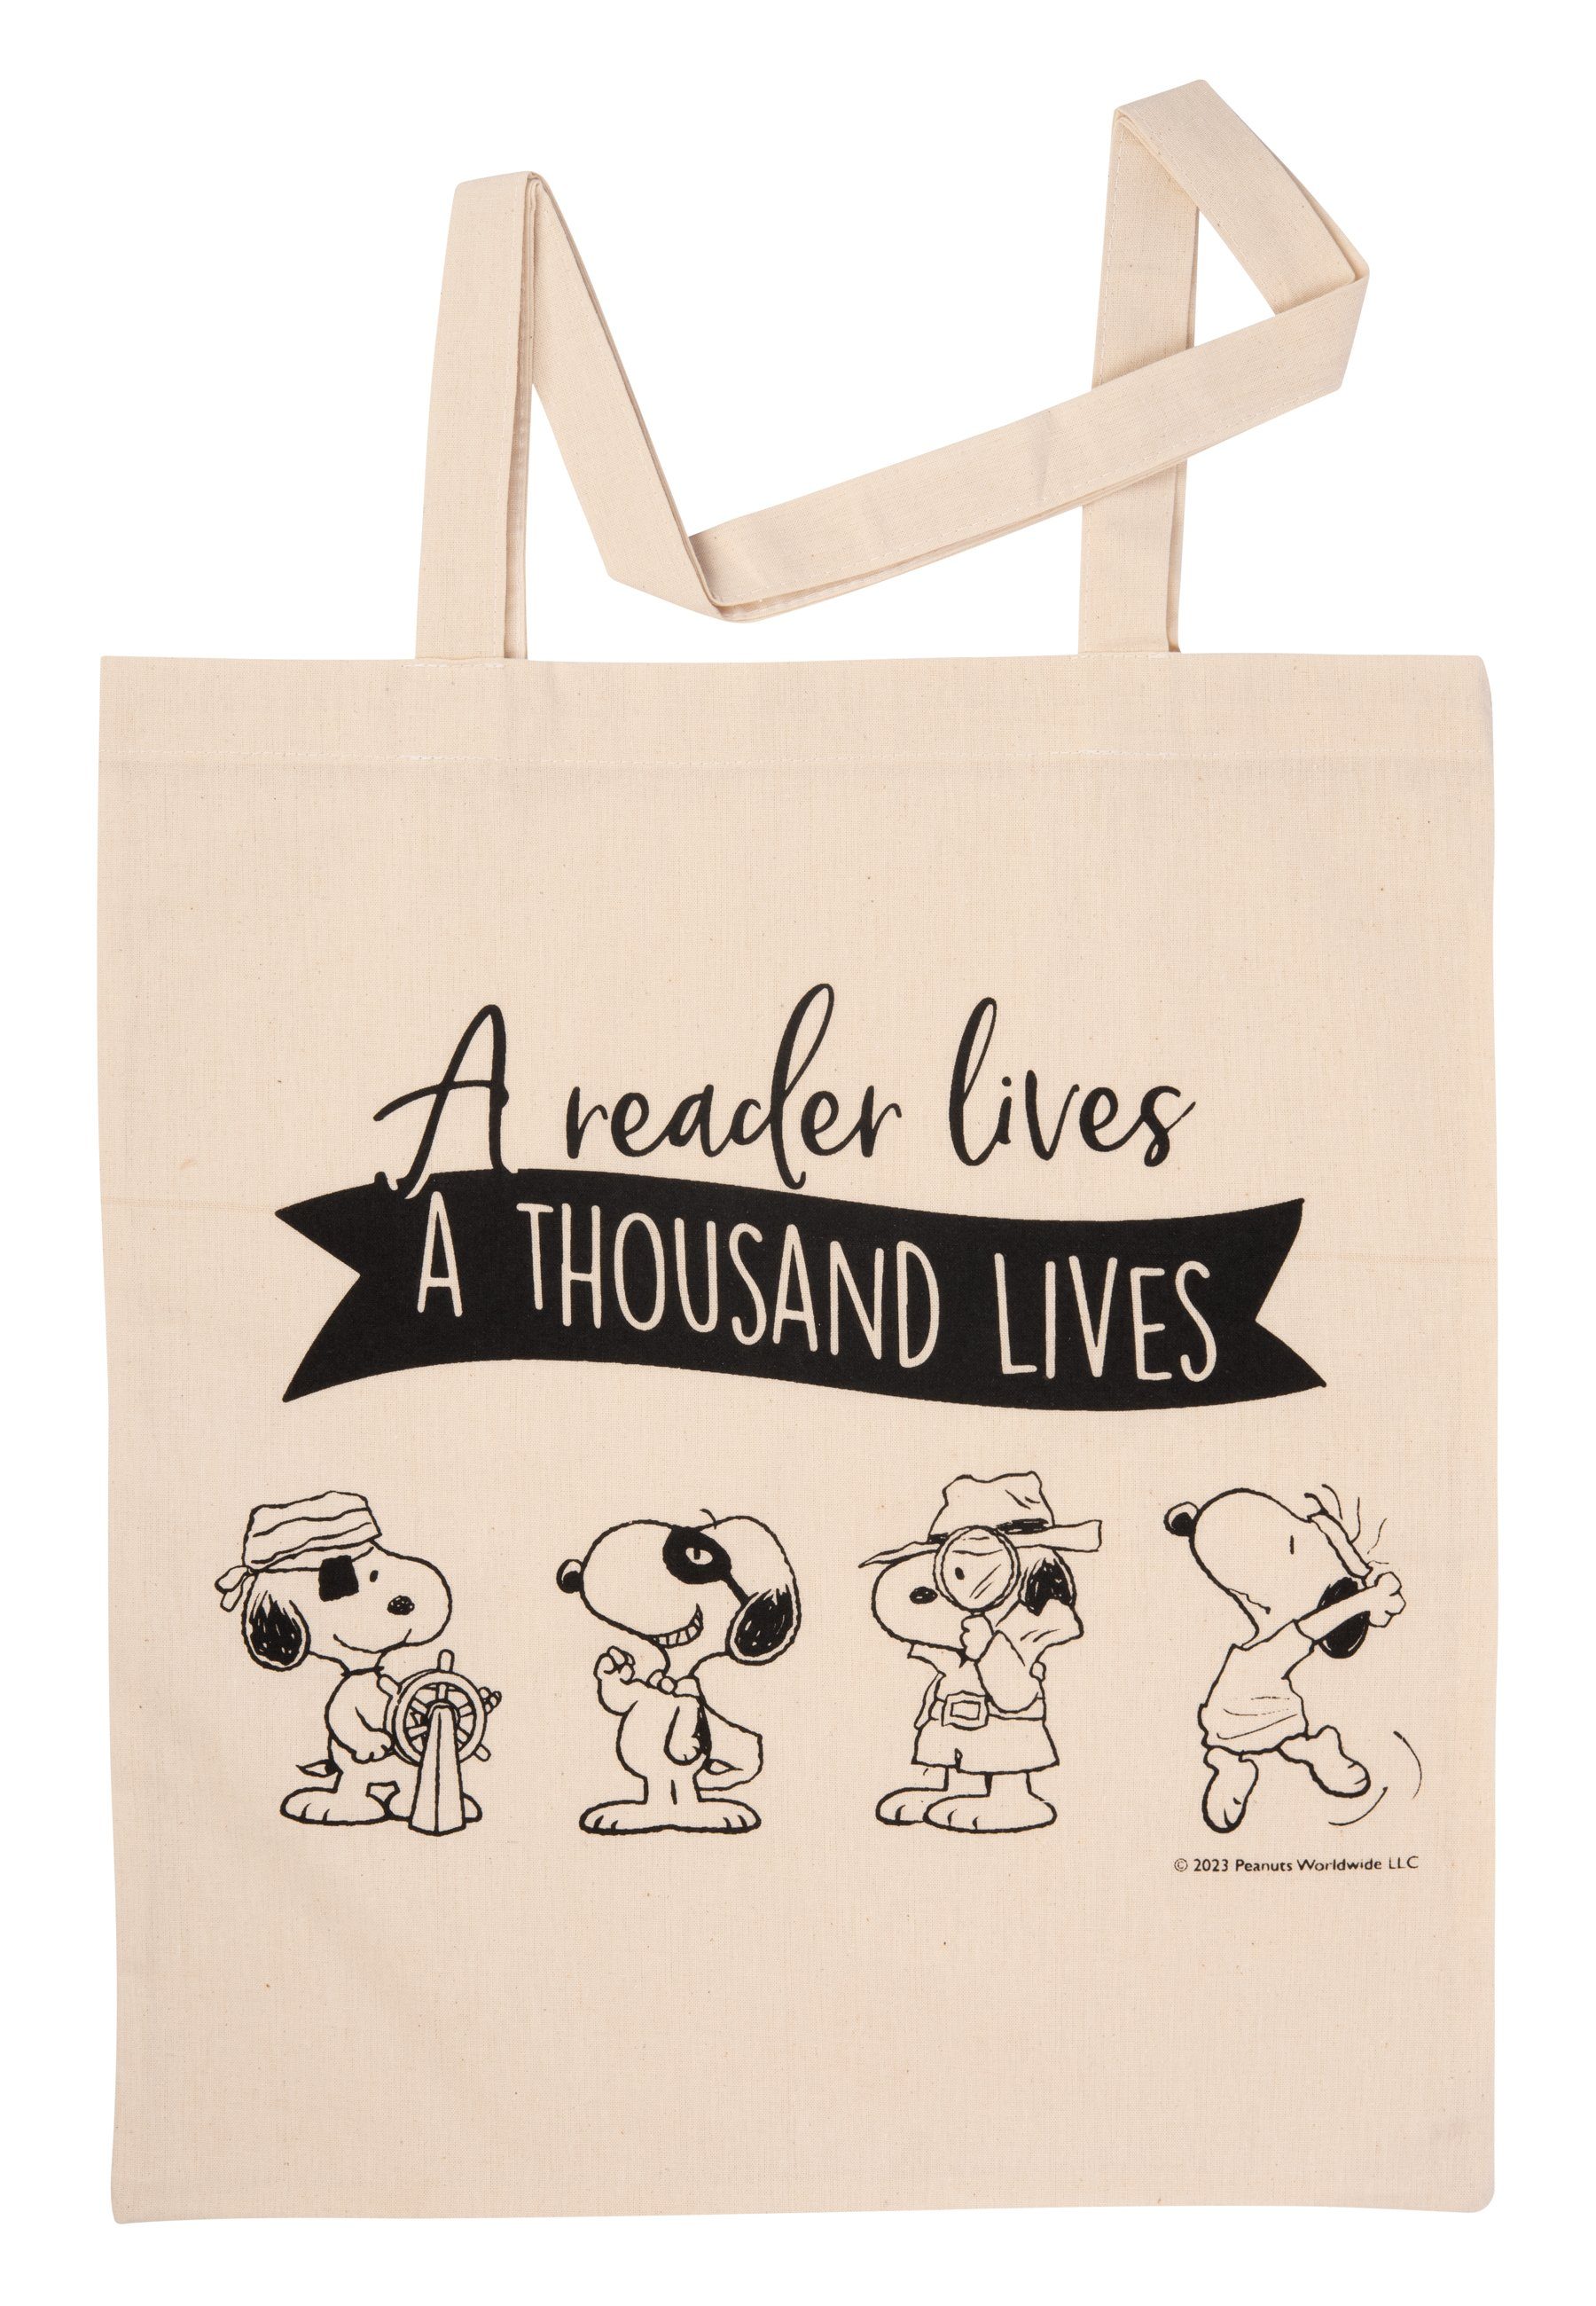 United Labels® Tragetasche The Peanuts Snoopy Stoffbeutel A reader lives a thousand lives Beige